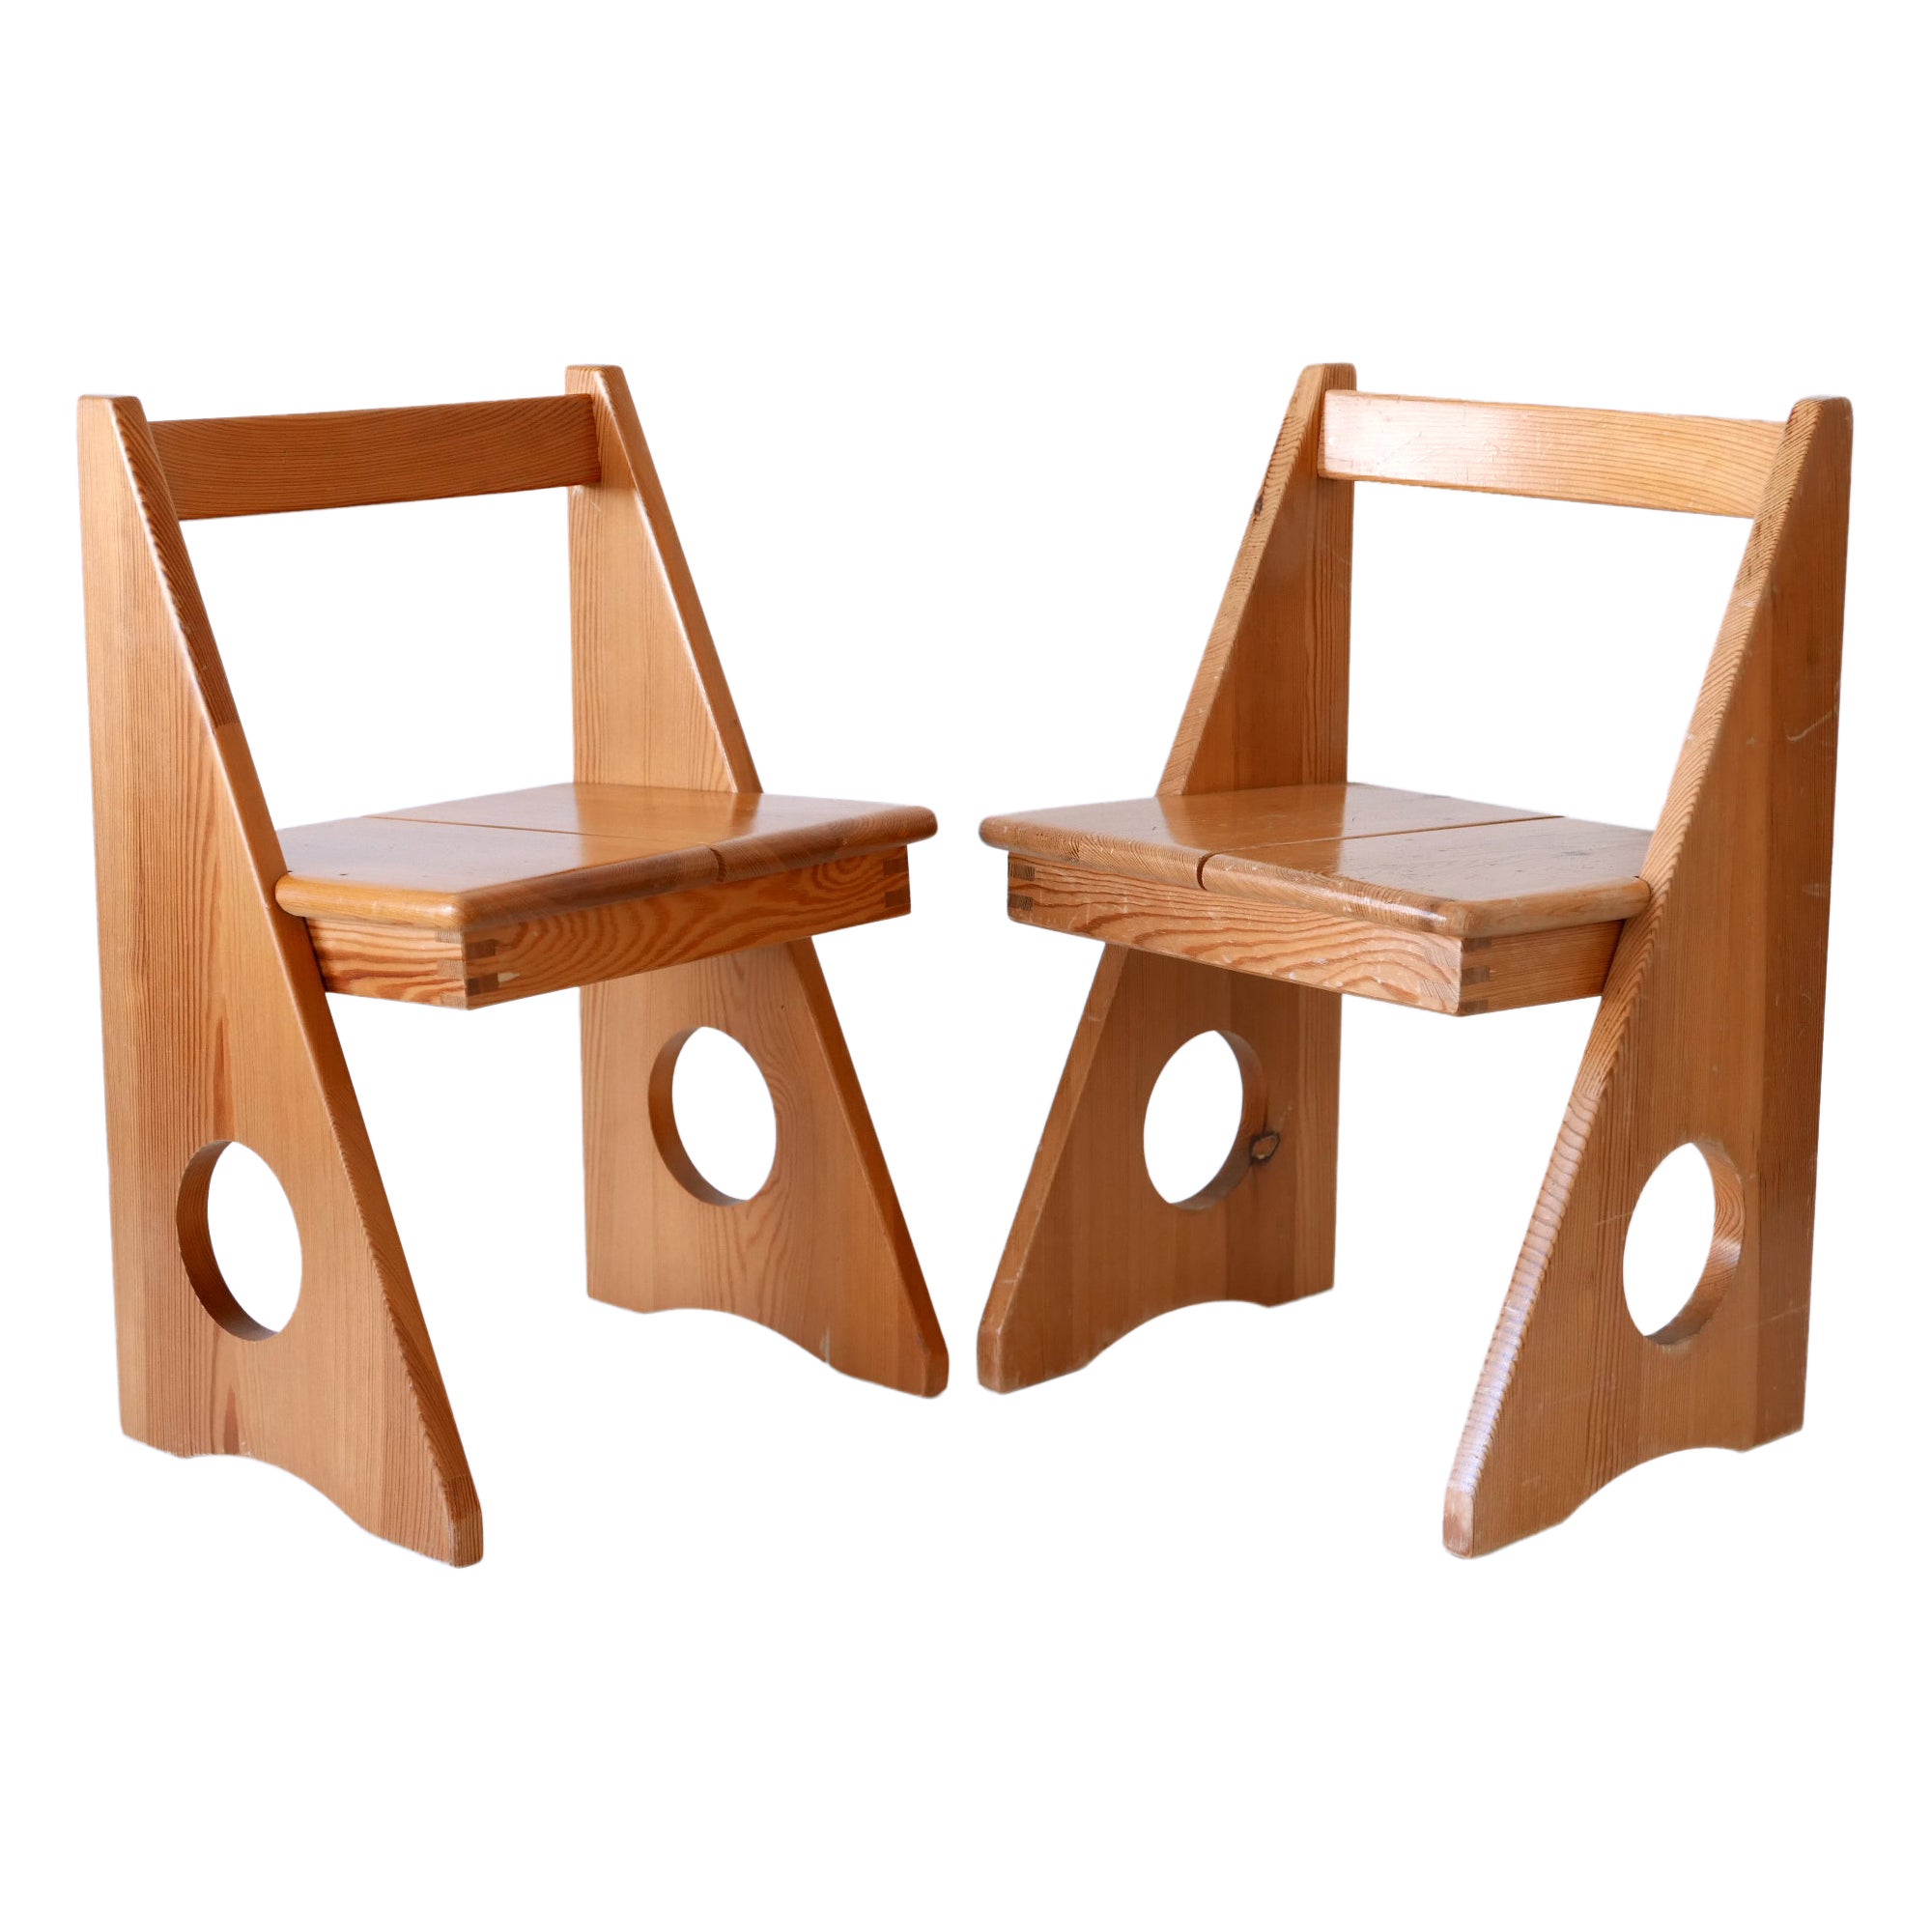 Set of Two Children's Chairs by Gilbert Marklund for Furusnickarn Sweden, 1970s